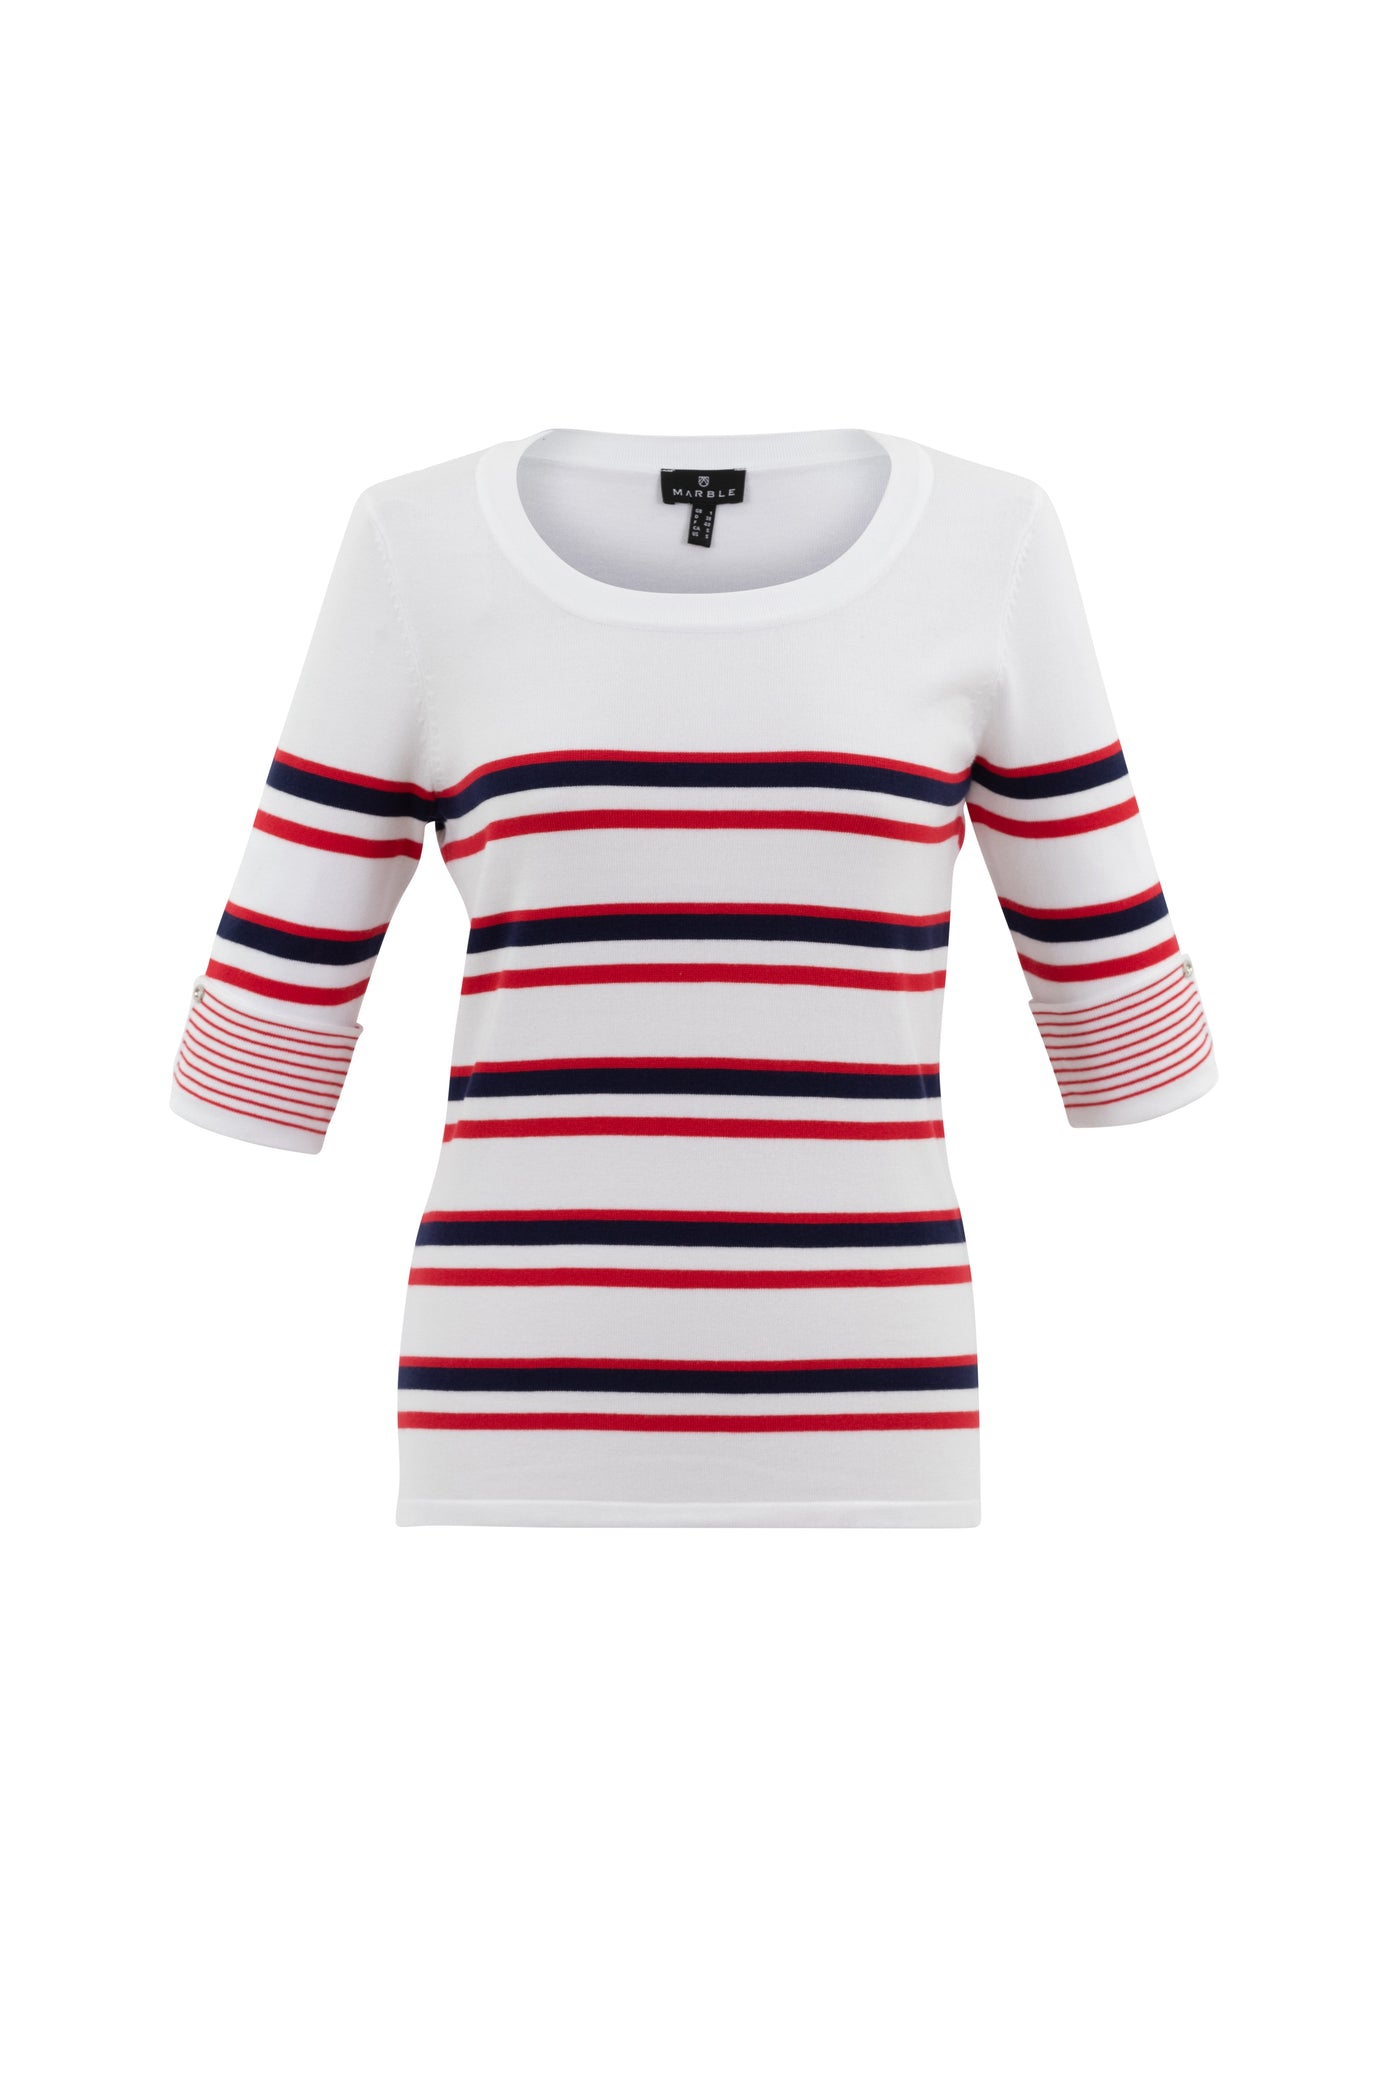 White Top With Navy/Red Stripes & Turn Up Sleeve